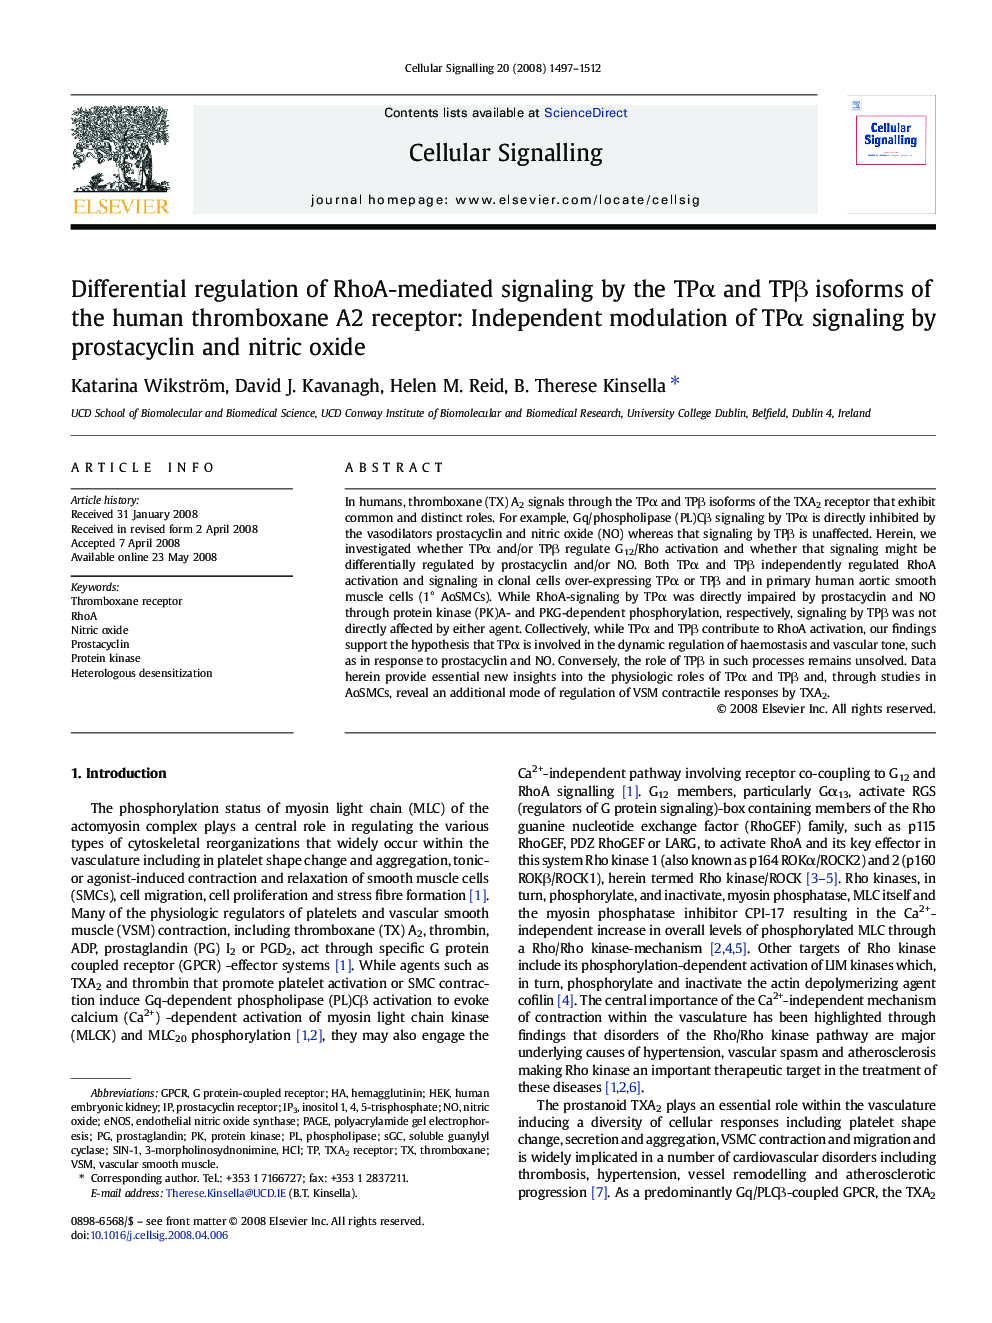 Differential regulation of RhoA-mediated signaling by the TPÎ± and TPÎ² isoforms of the human thromboxane A2 receptor: Independent modulation of TPÎ± signaling by prostacyclin and nitric oxide